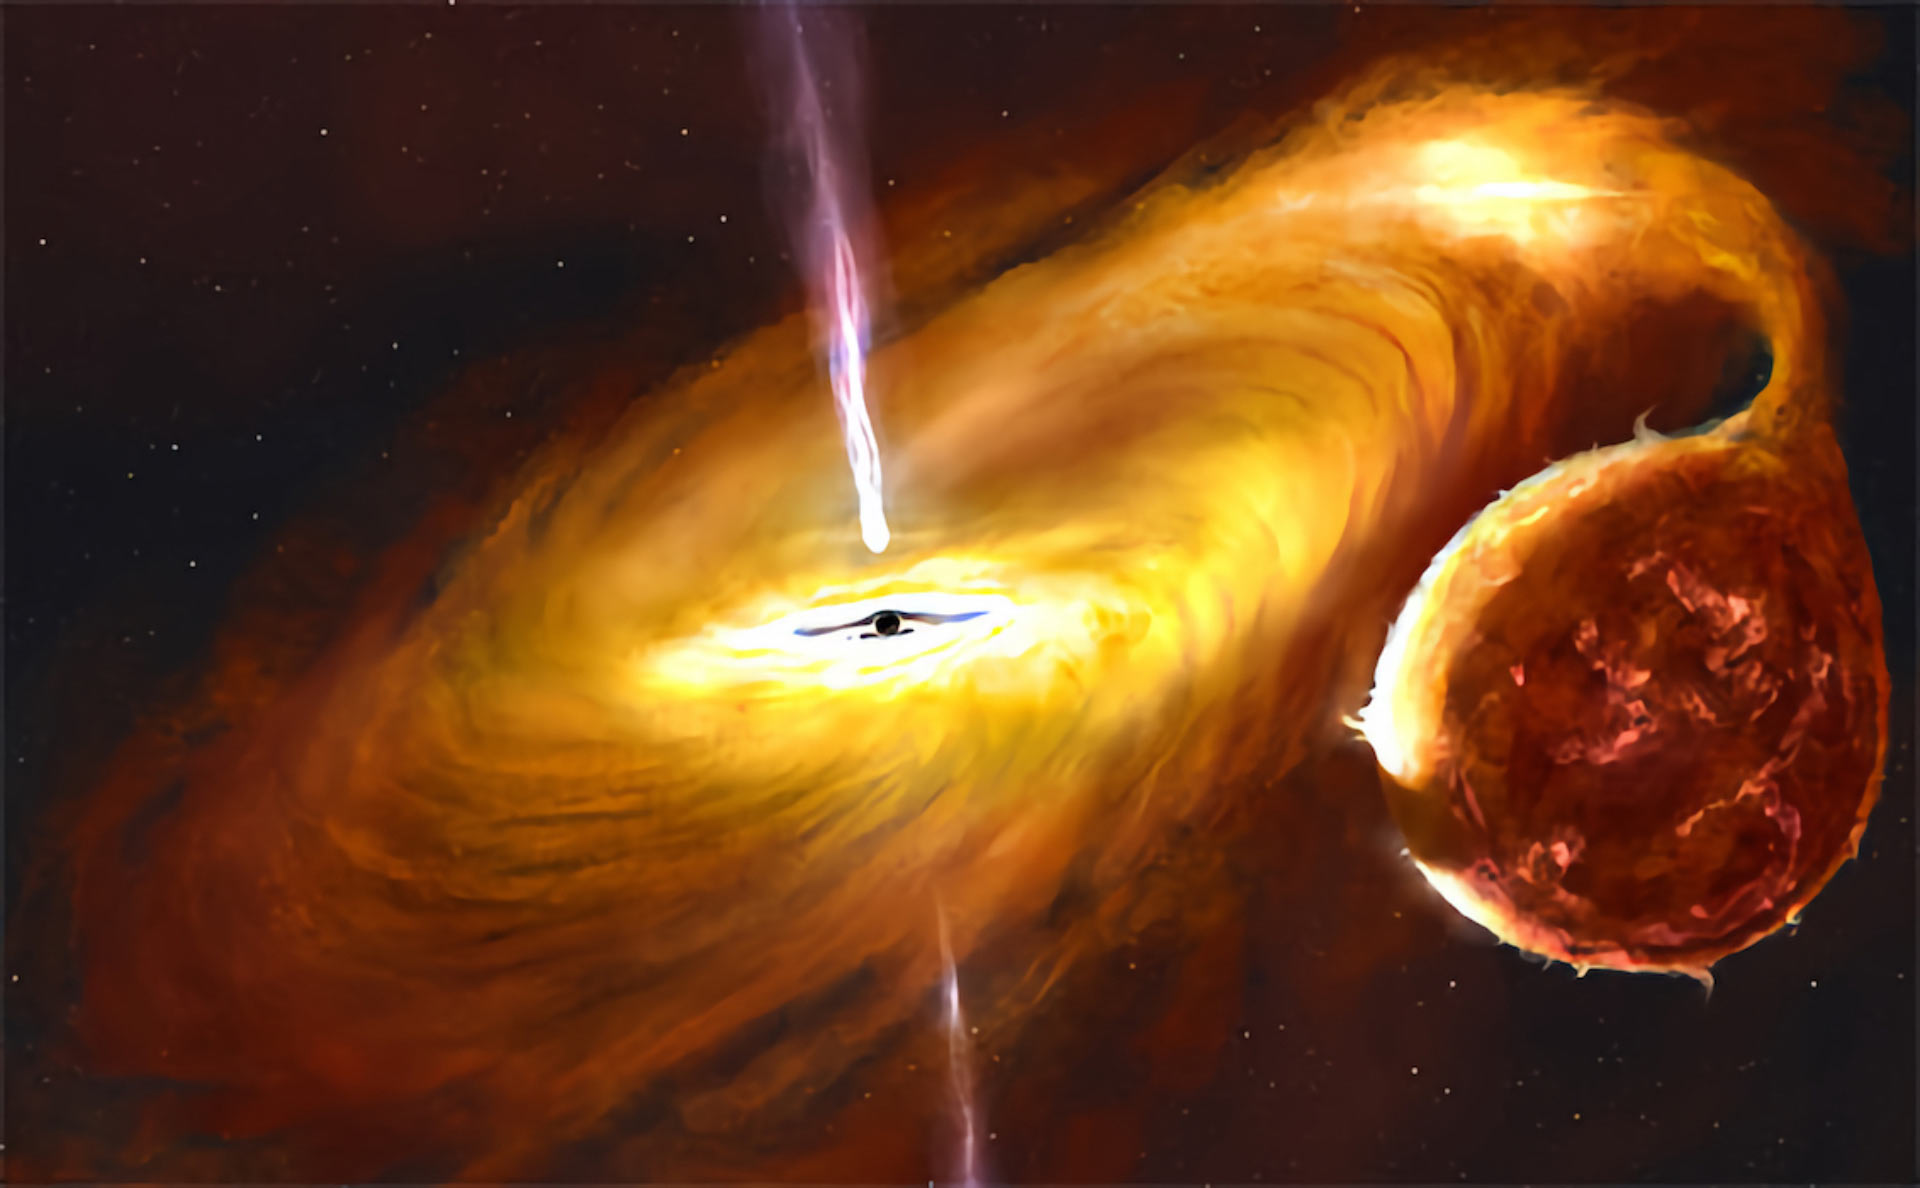 Artist's impression of a black hole with a warped accretion disc. Credit: John Paice